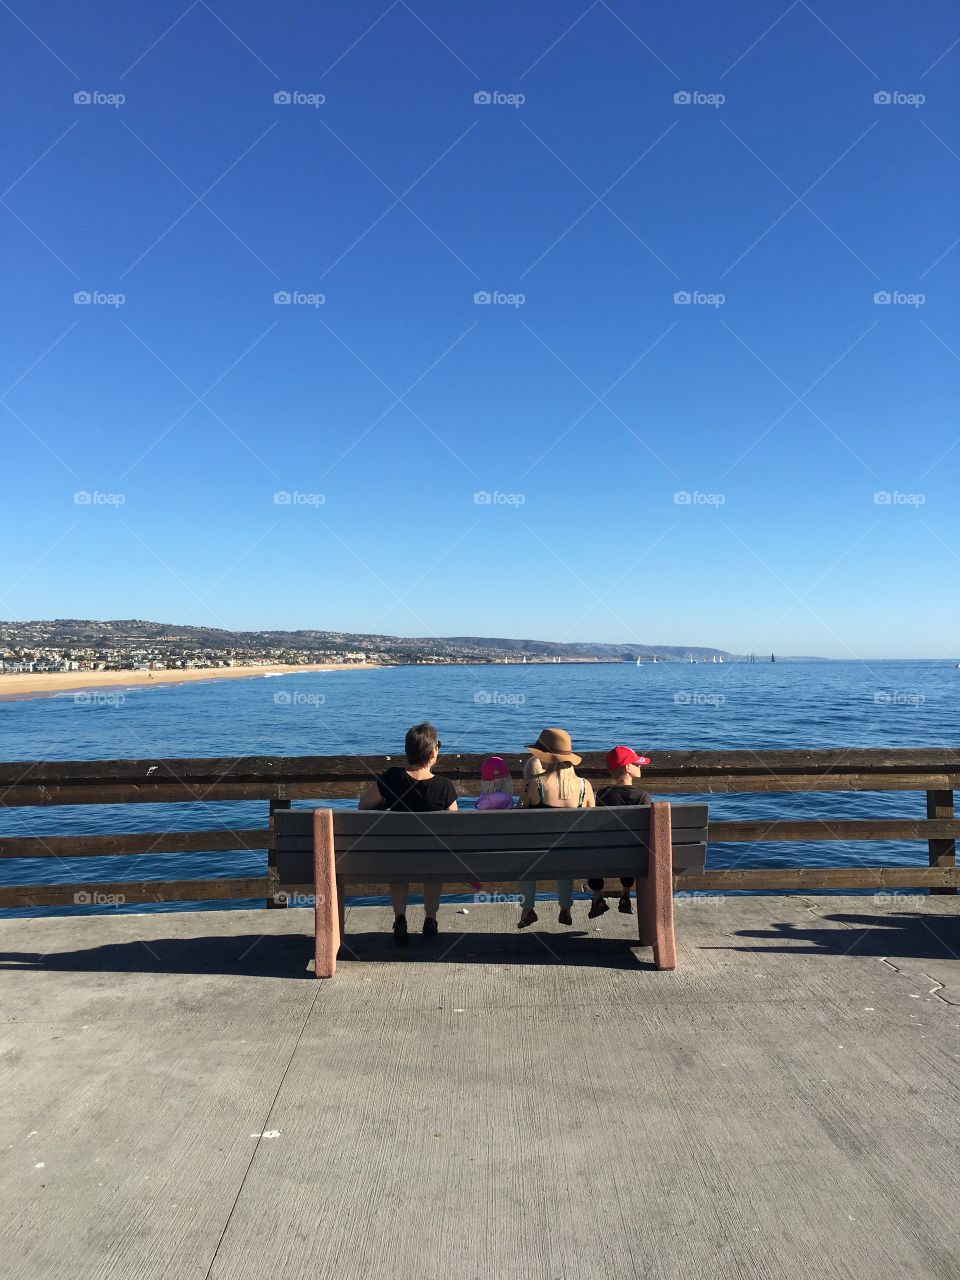 Sitting on a bench looking into the ocean. 